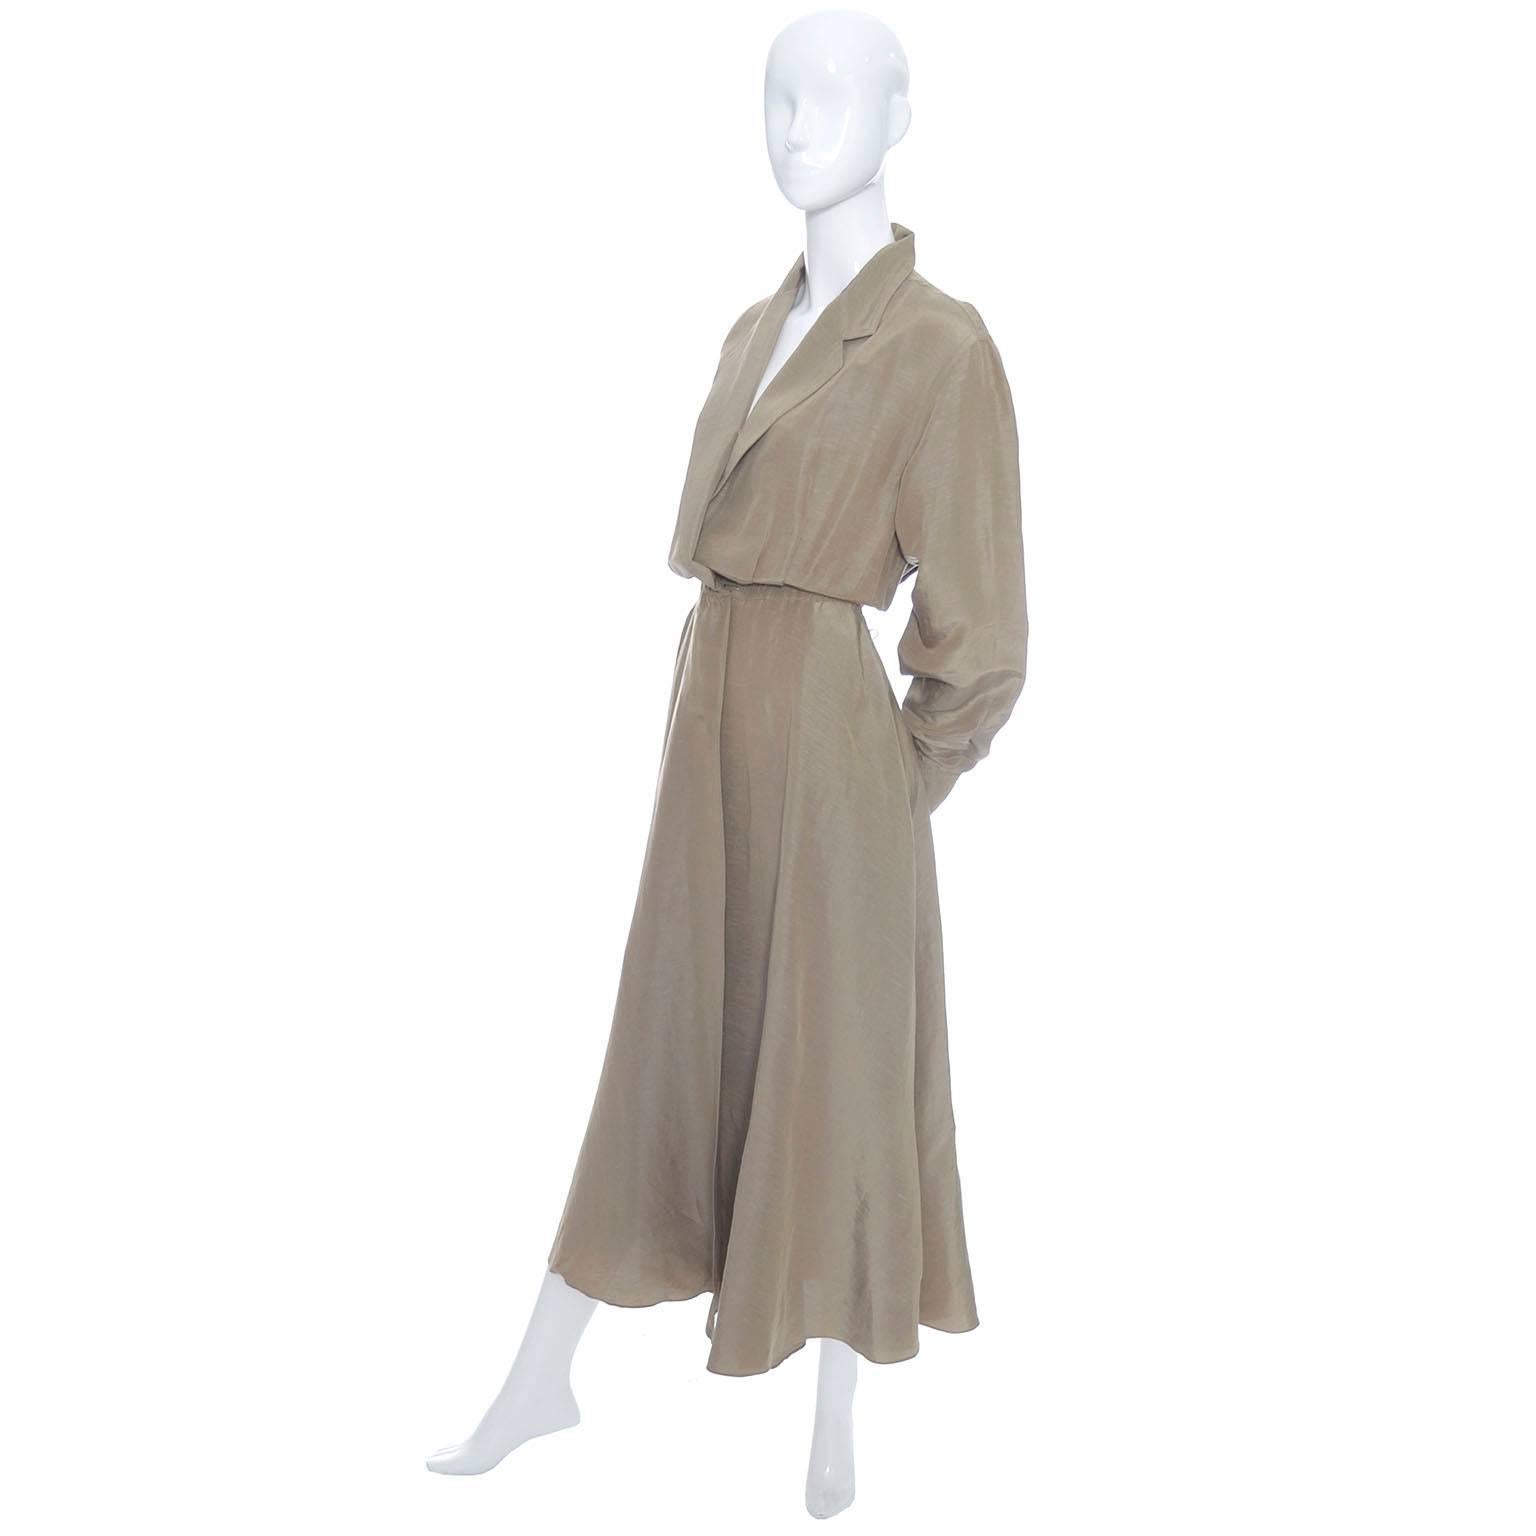 This vintage Donna Karan dress is 65% linen and 35% silk and it is in excellent condition. This dress has side slit pockets, a full skirt, and snaps to close. The color is a bronze-taupe and the dress has long sleeves and pretty lapels at the deep V